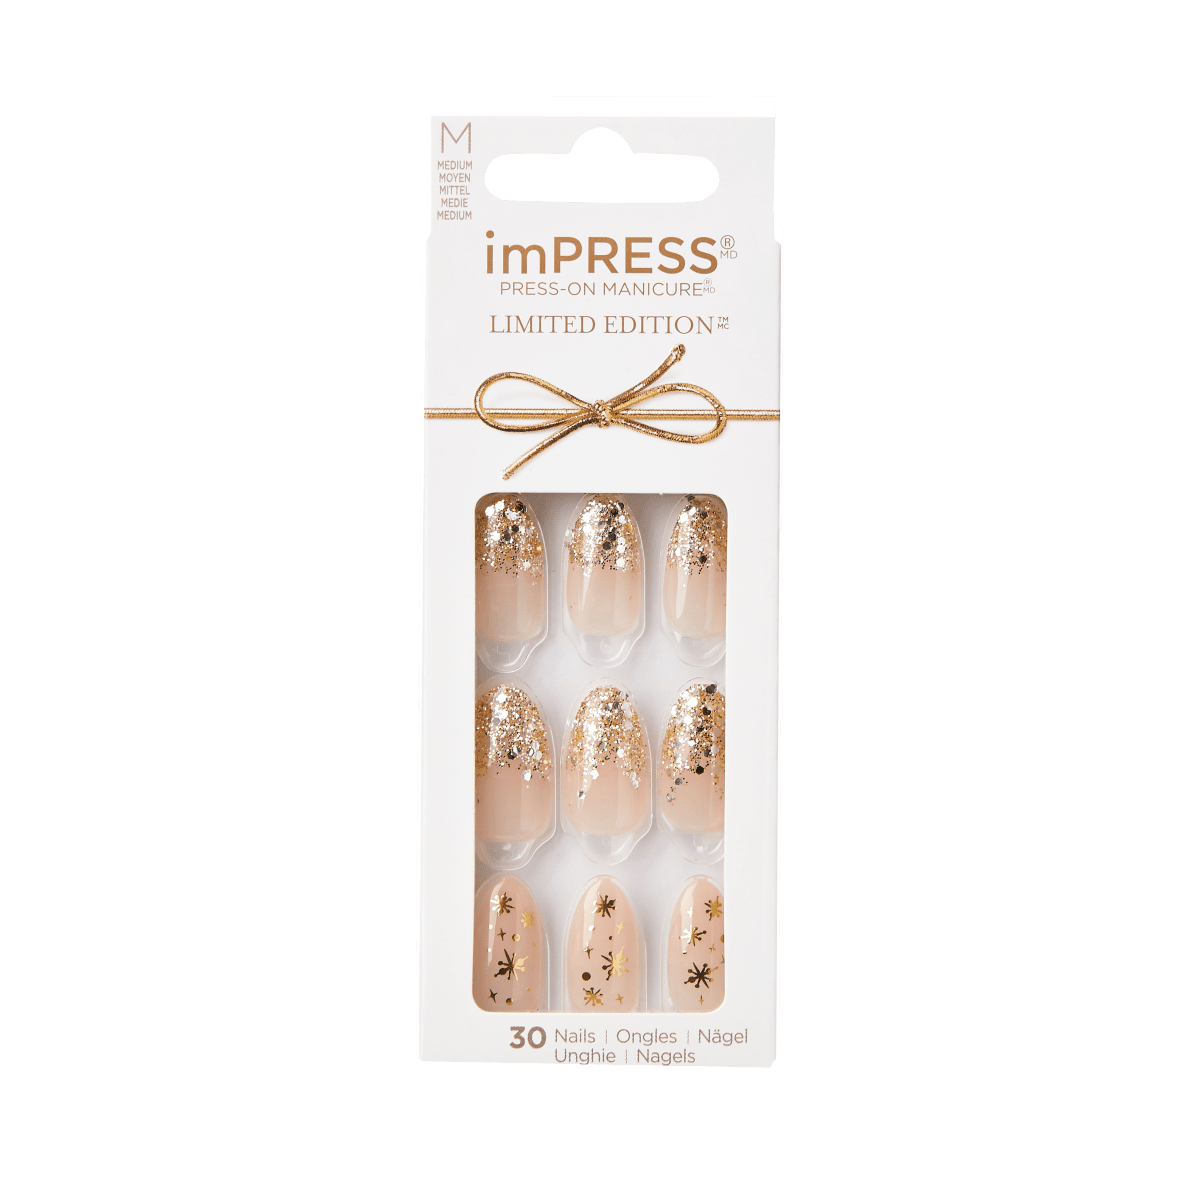 imPRESS Limited-Edition Holiday Press-On Nails - Sparkling Snow